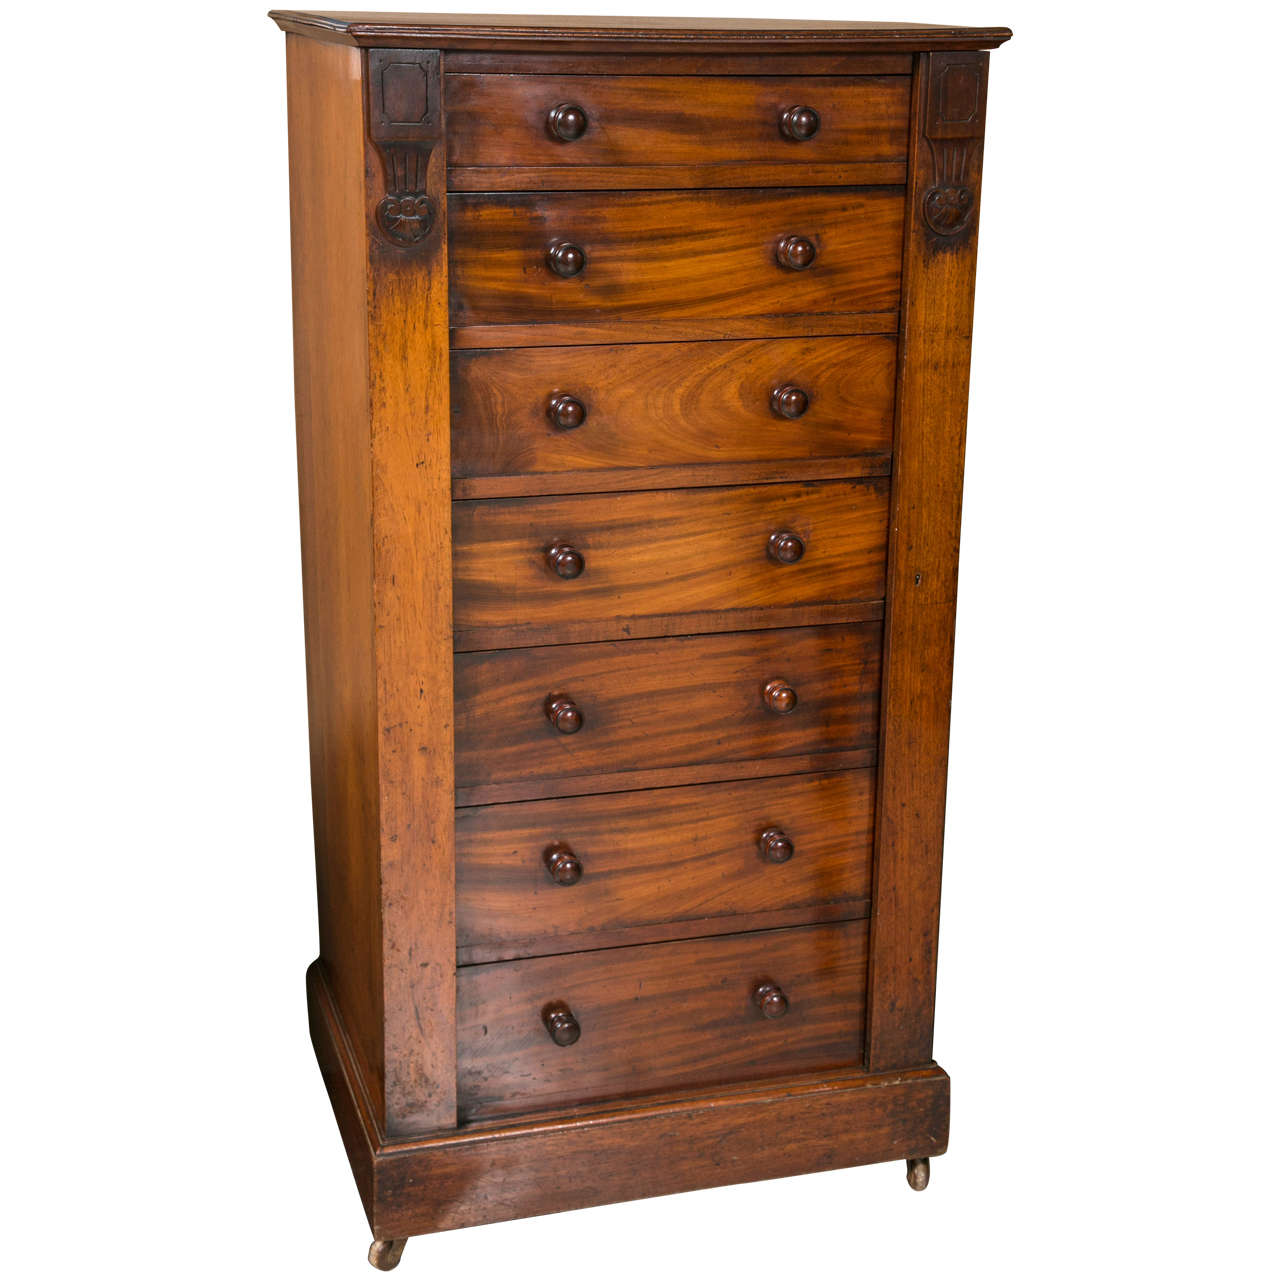 19th c. Mahogany Wellington Chest with 7 Graduated Drawers